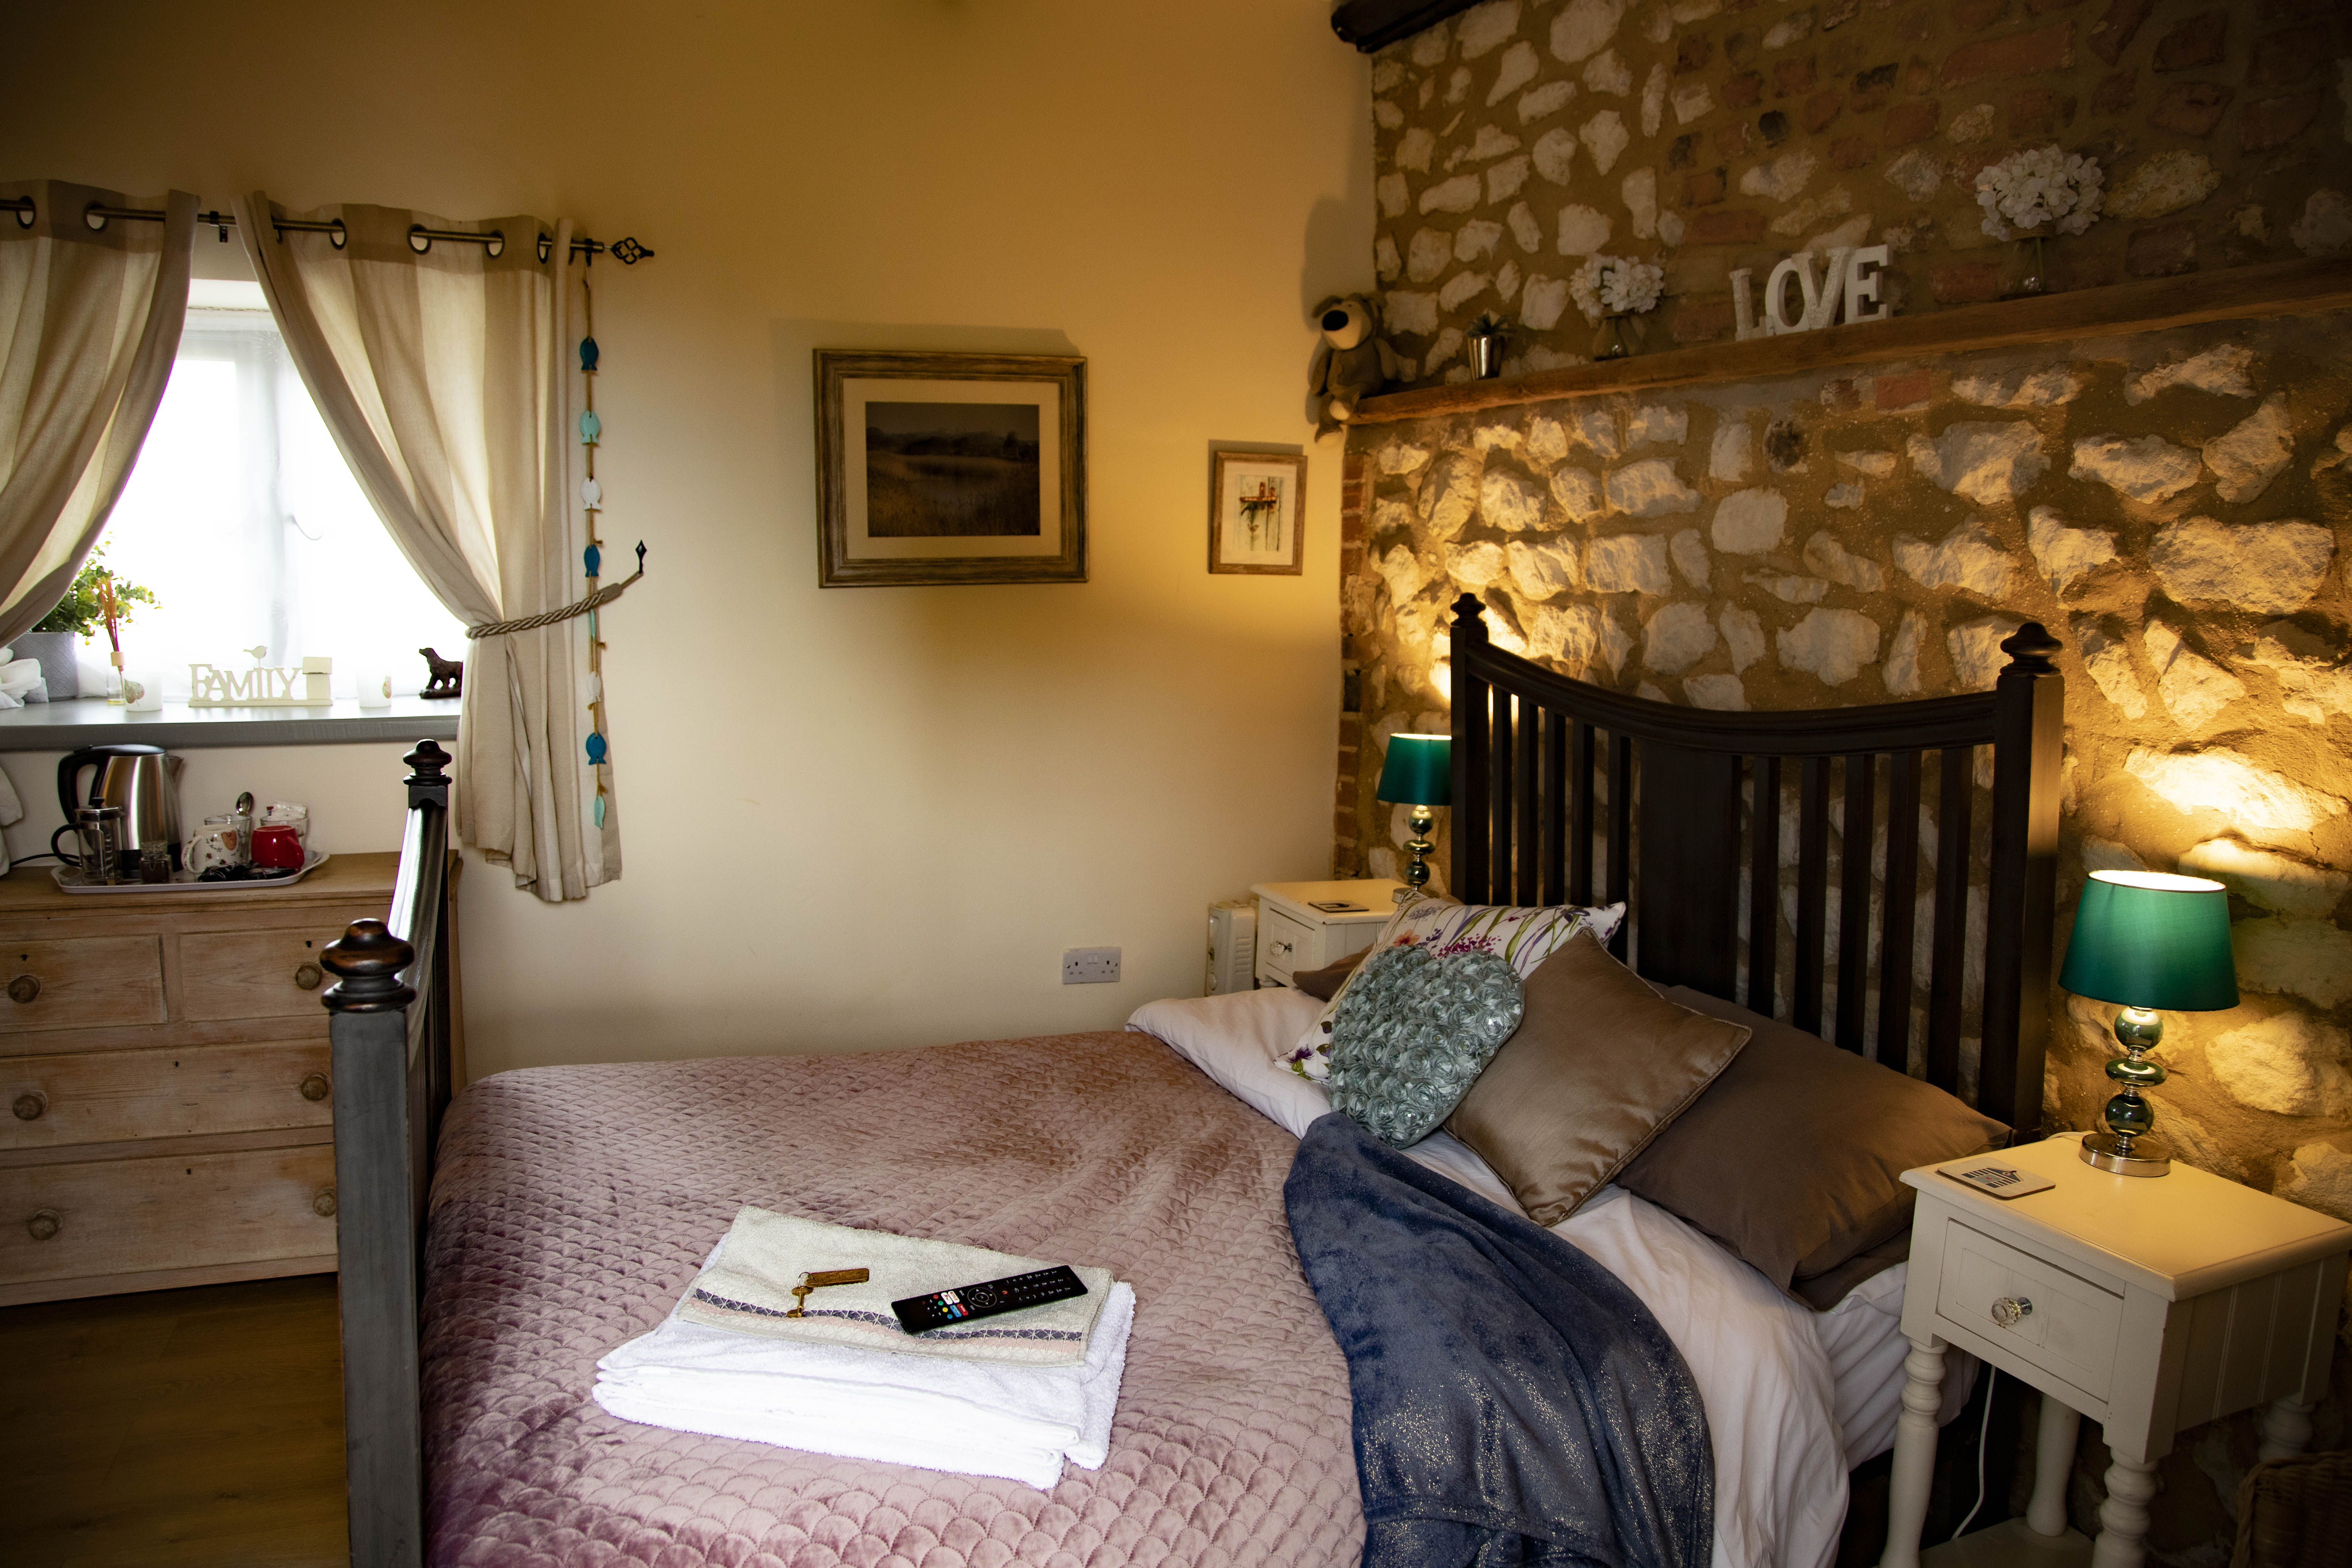 SANDRINGHAM STAY IN B&B: THE WOODSHED